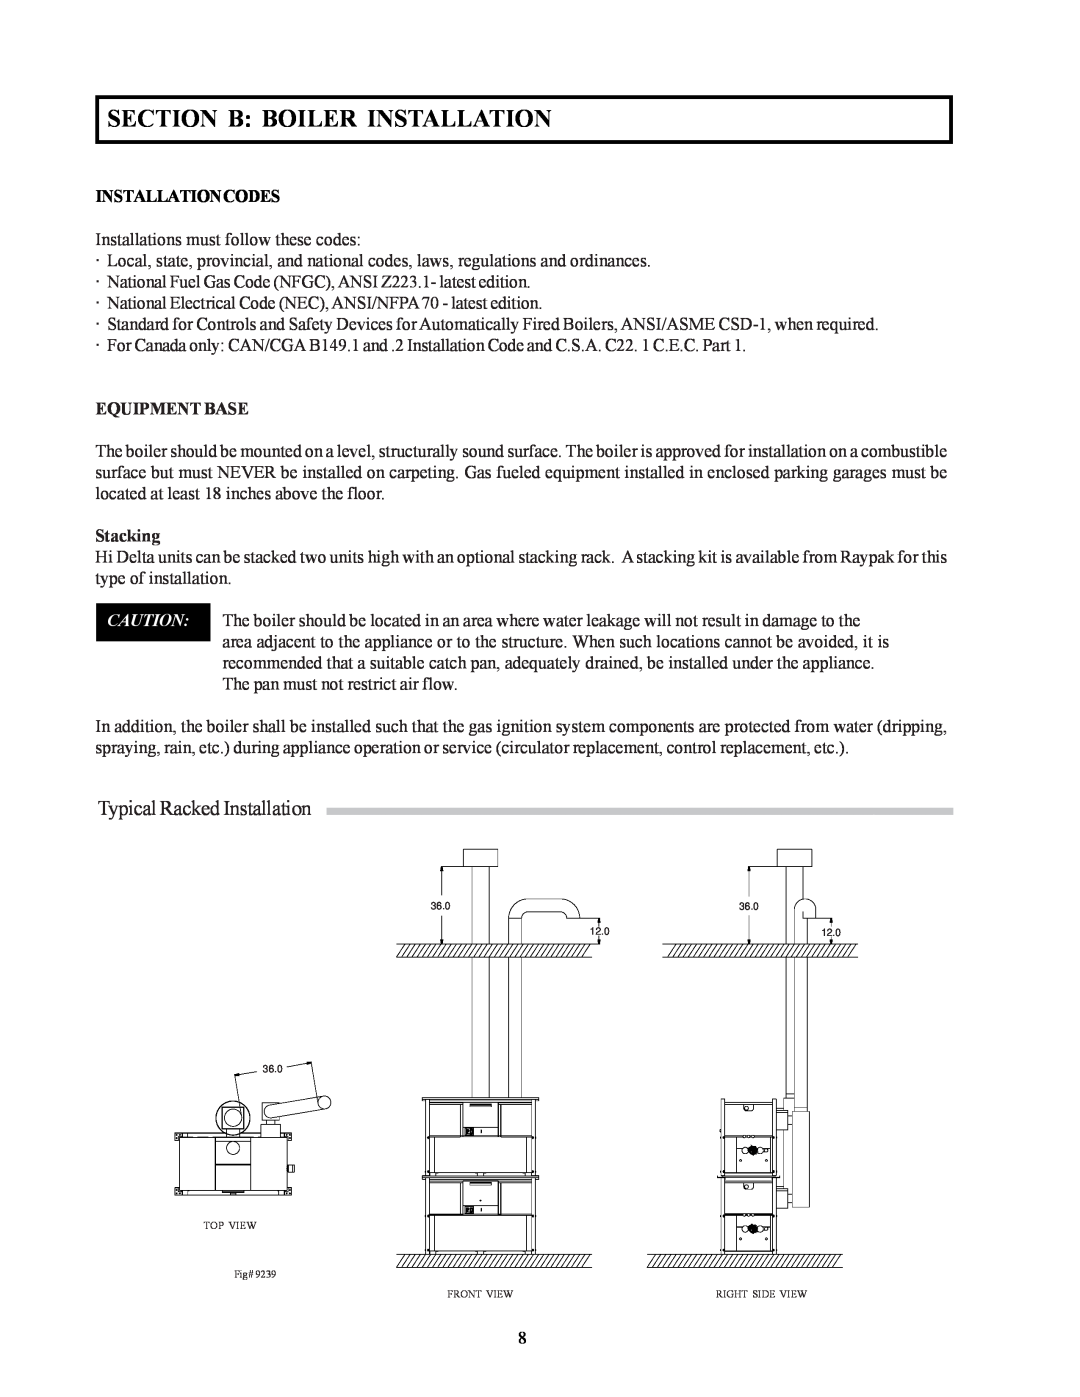 Raypak 302-902 Section B Boiler Installation, Typical Racked Installation, Installationcodes, Equipment Base, Stacking 